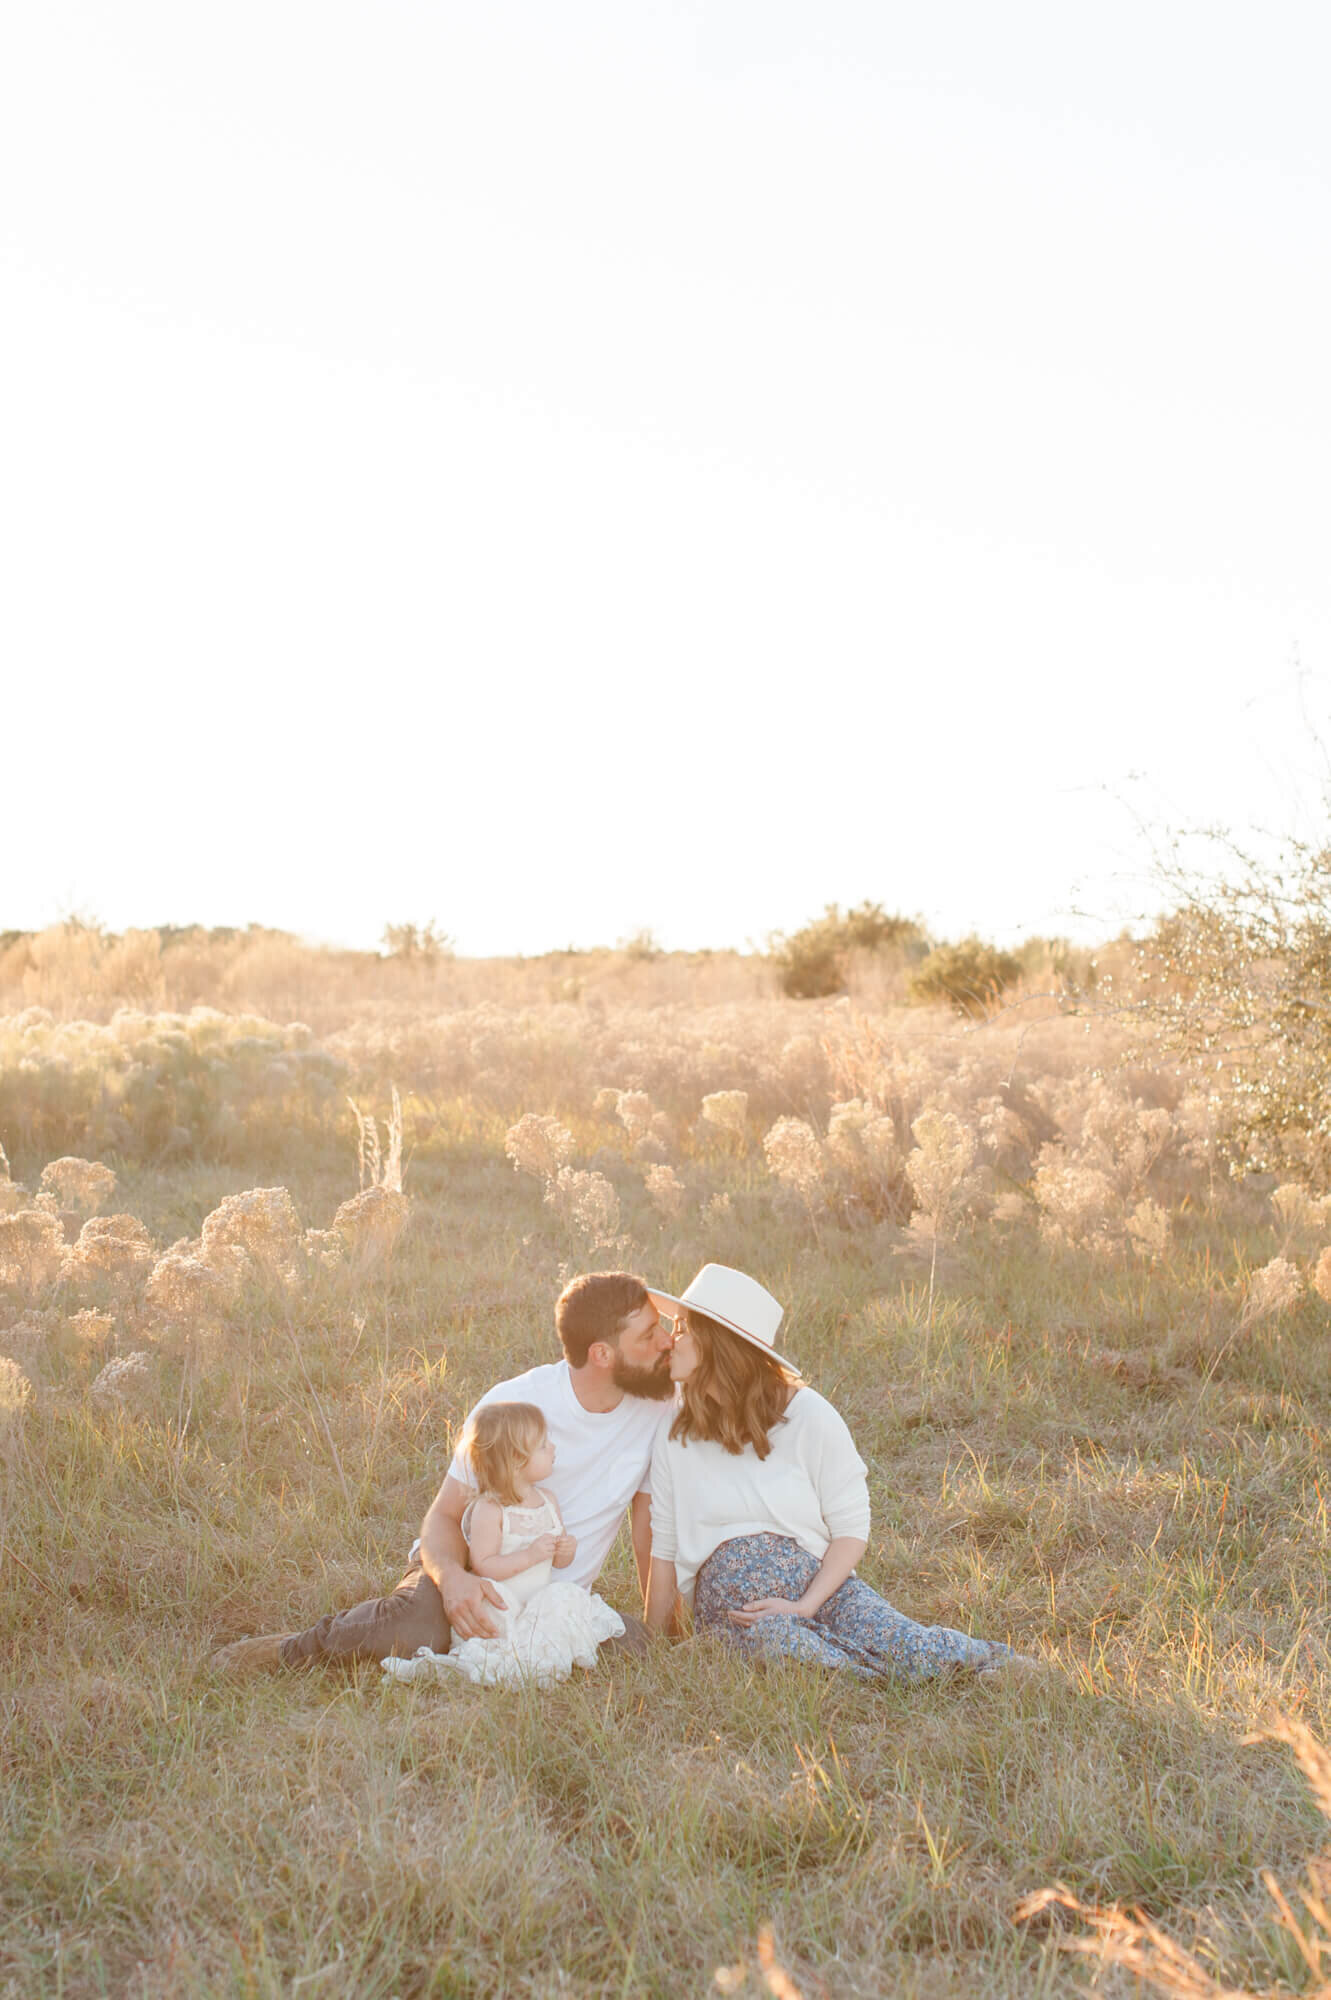 Pregnant couple kissing and sitting in a tall grass field at sunset holding their young daughter